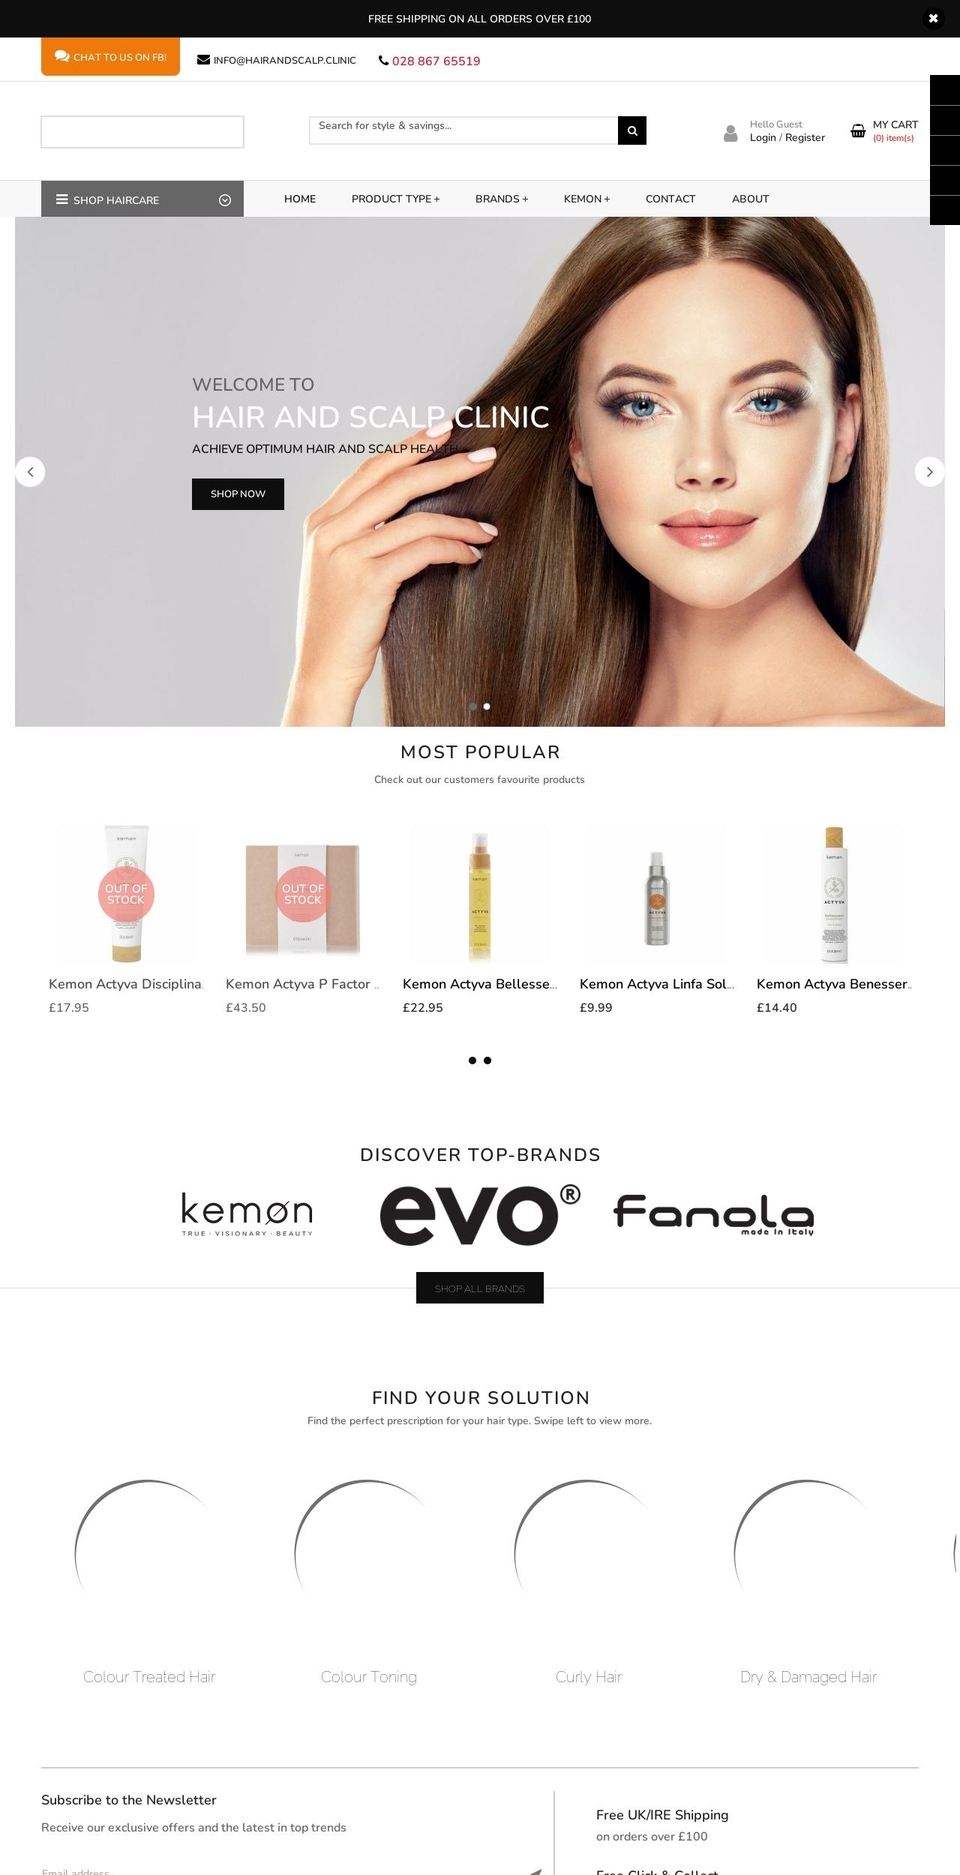 Comfortic Shopify theme site example hairandscalp.clinic